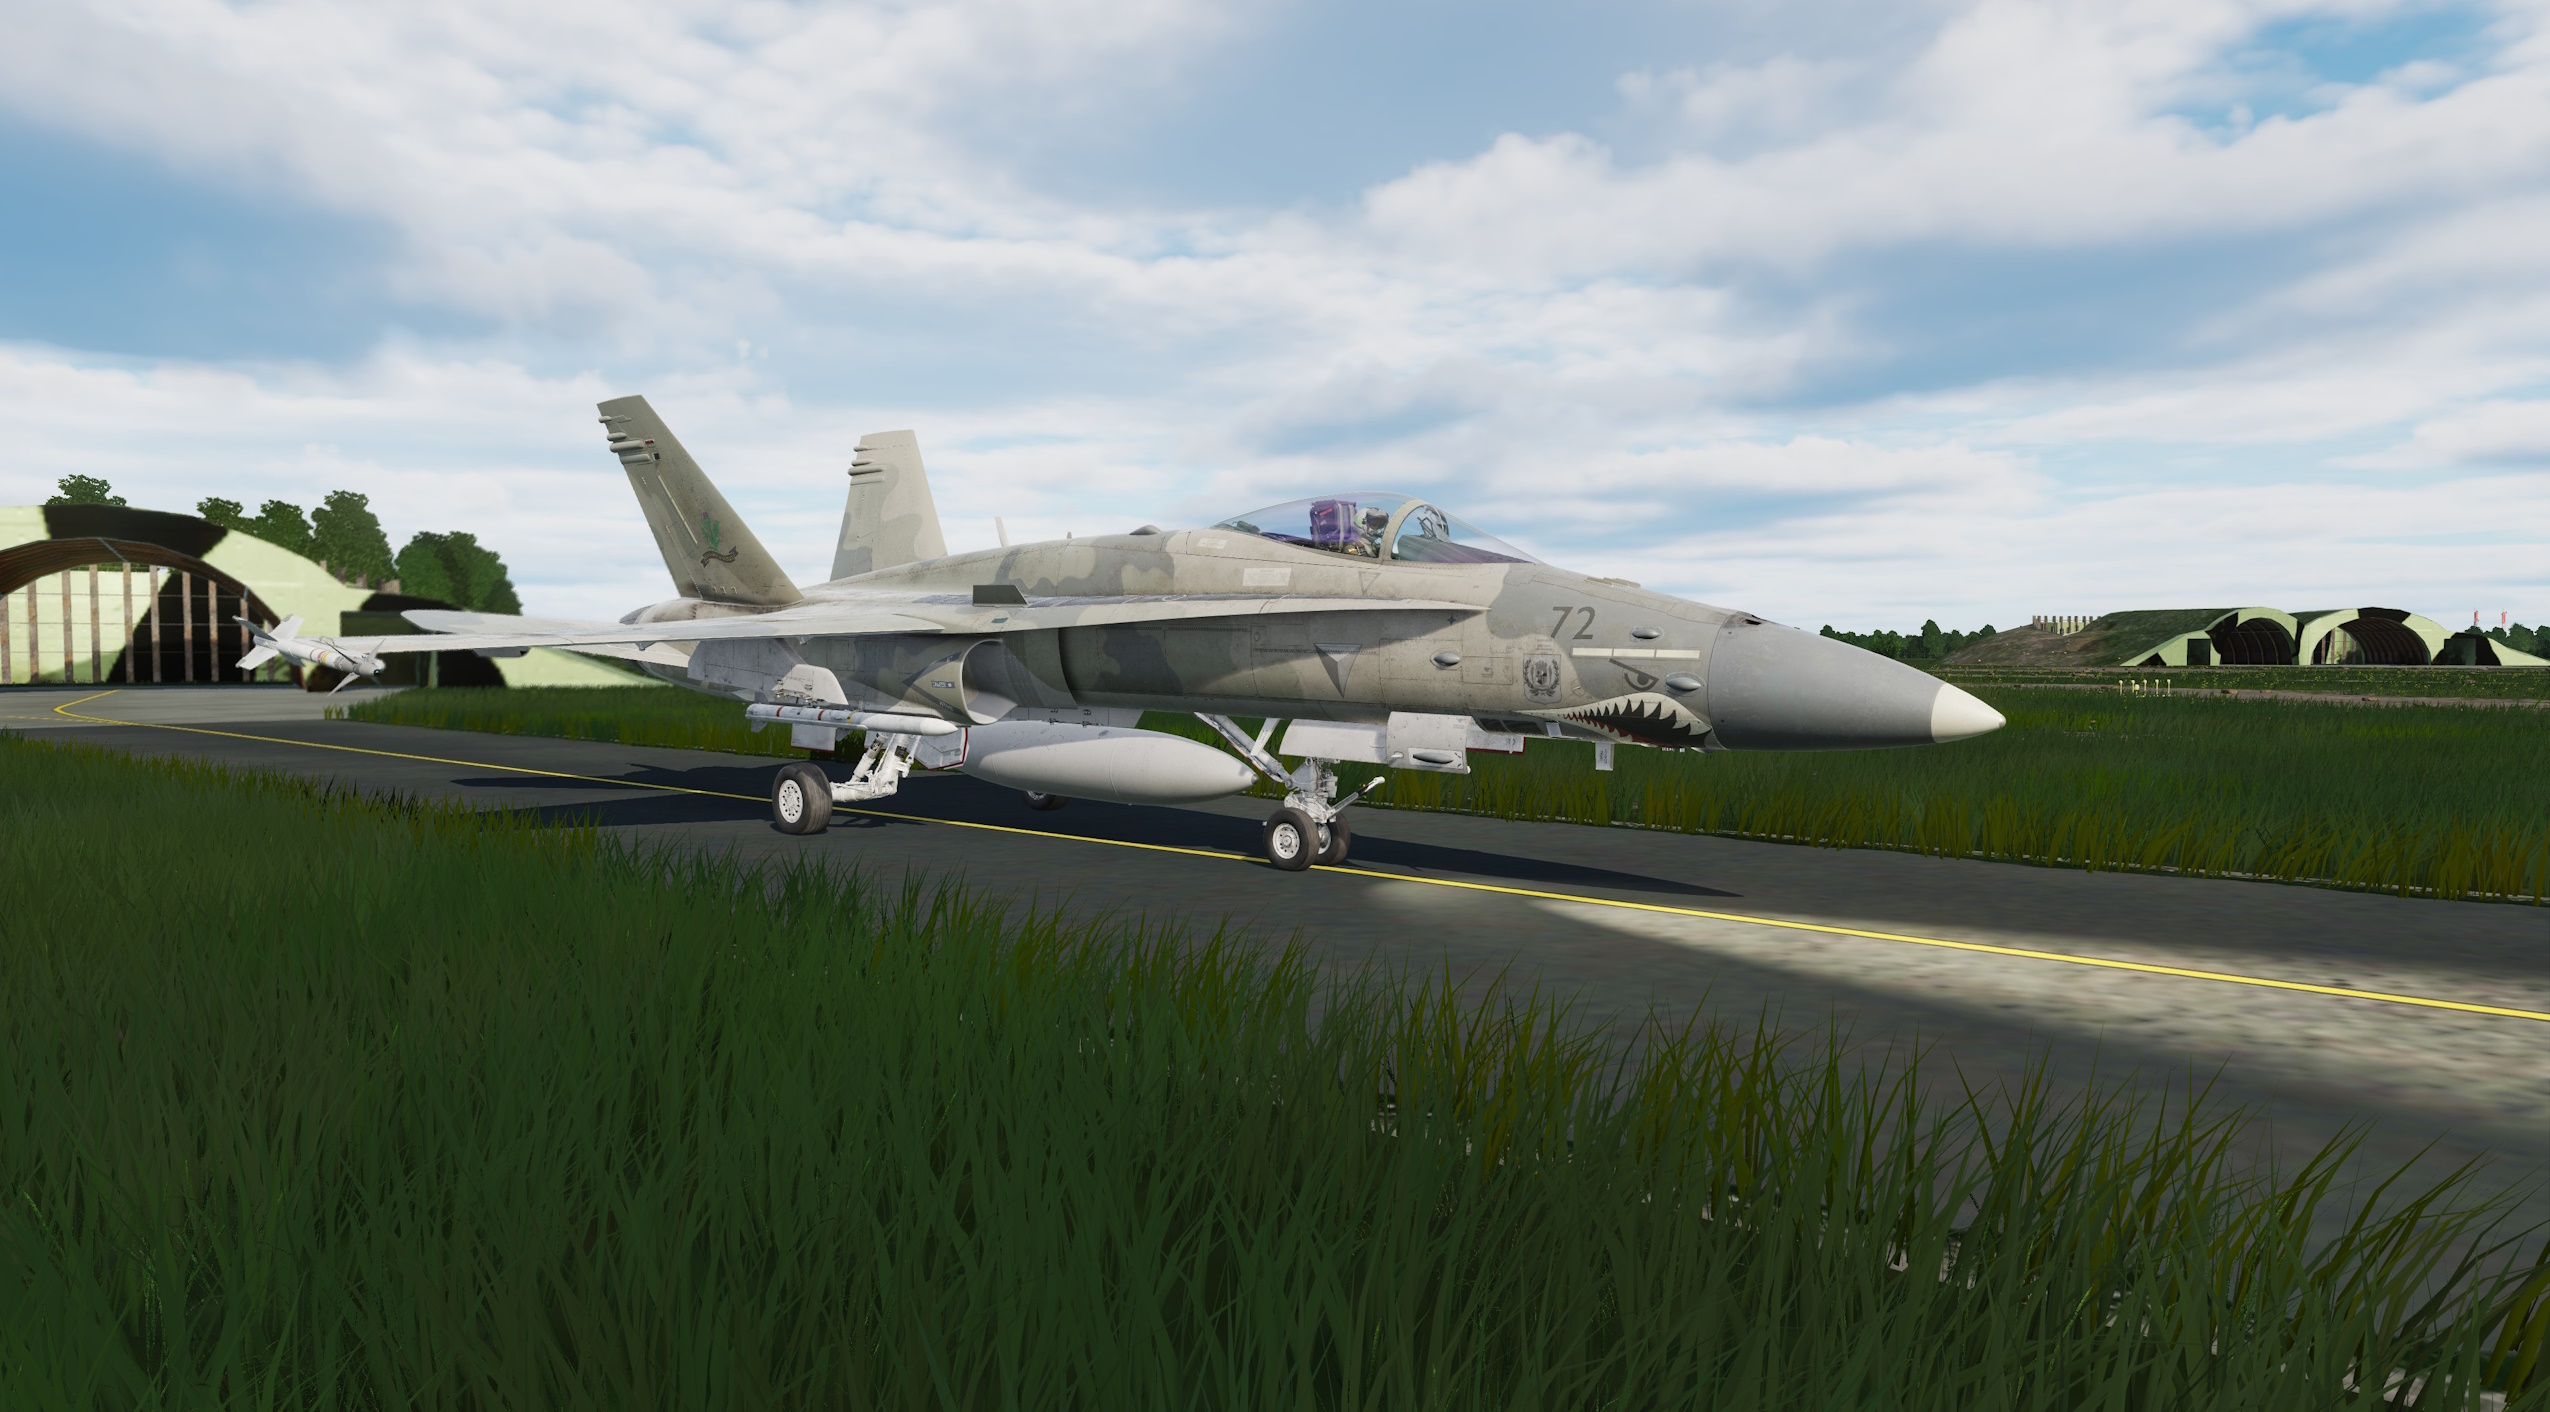 ACE COMBAT - F-18C - Nordennavic Royal Air Force - Sqn "Languedoc" V1 SPA 38 "old style"